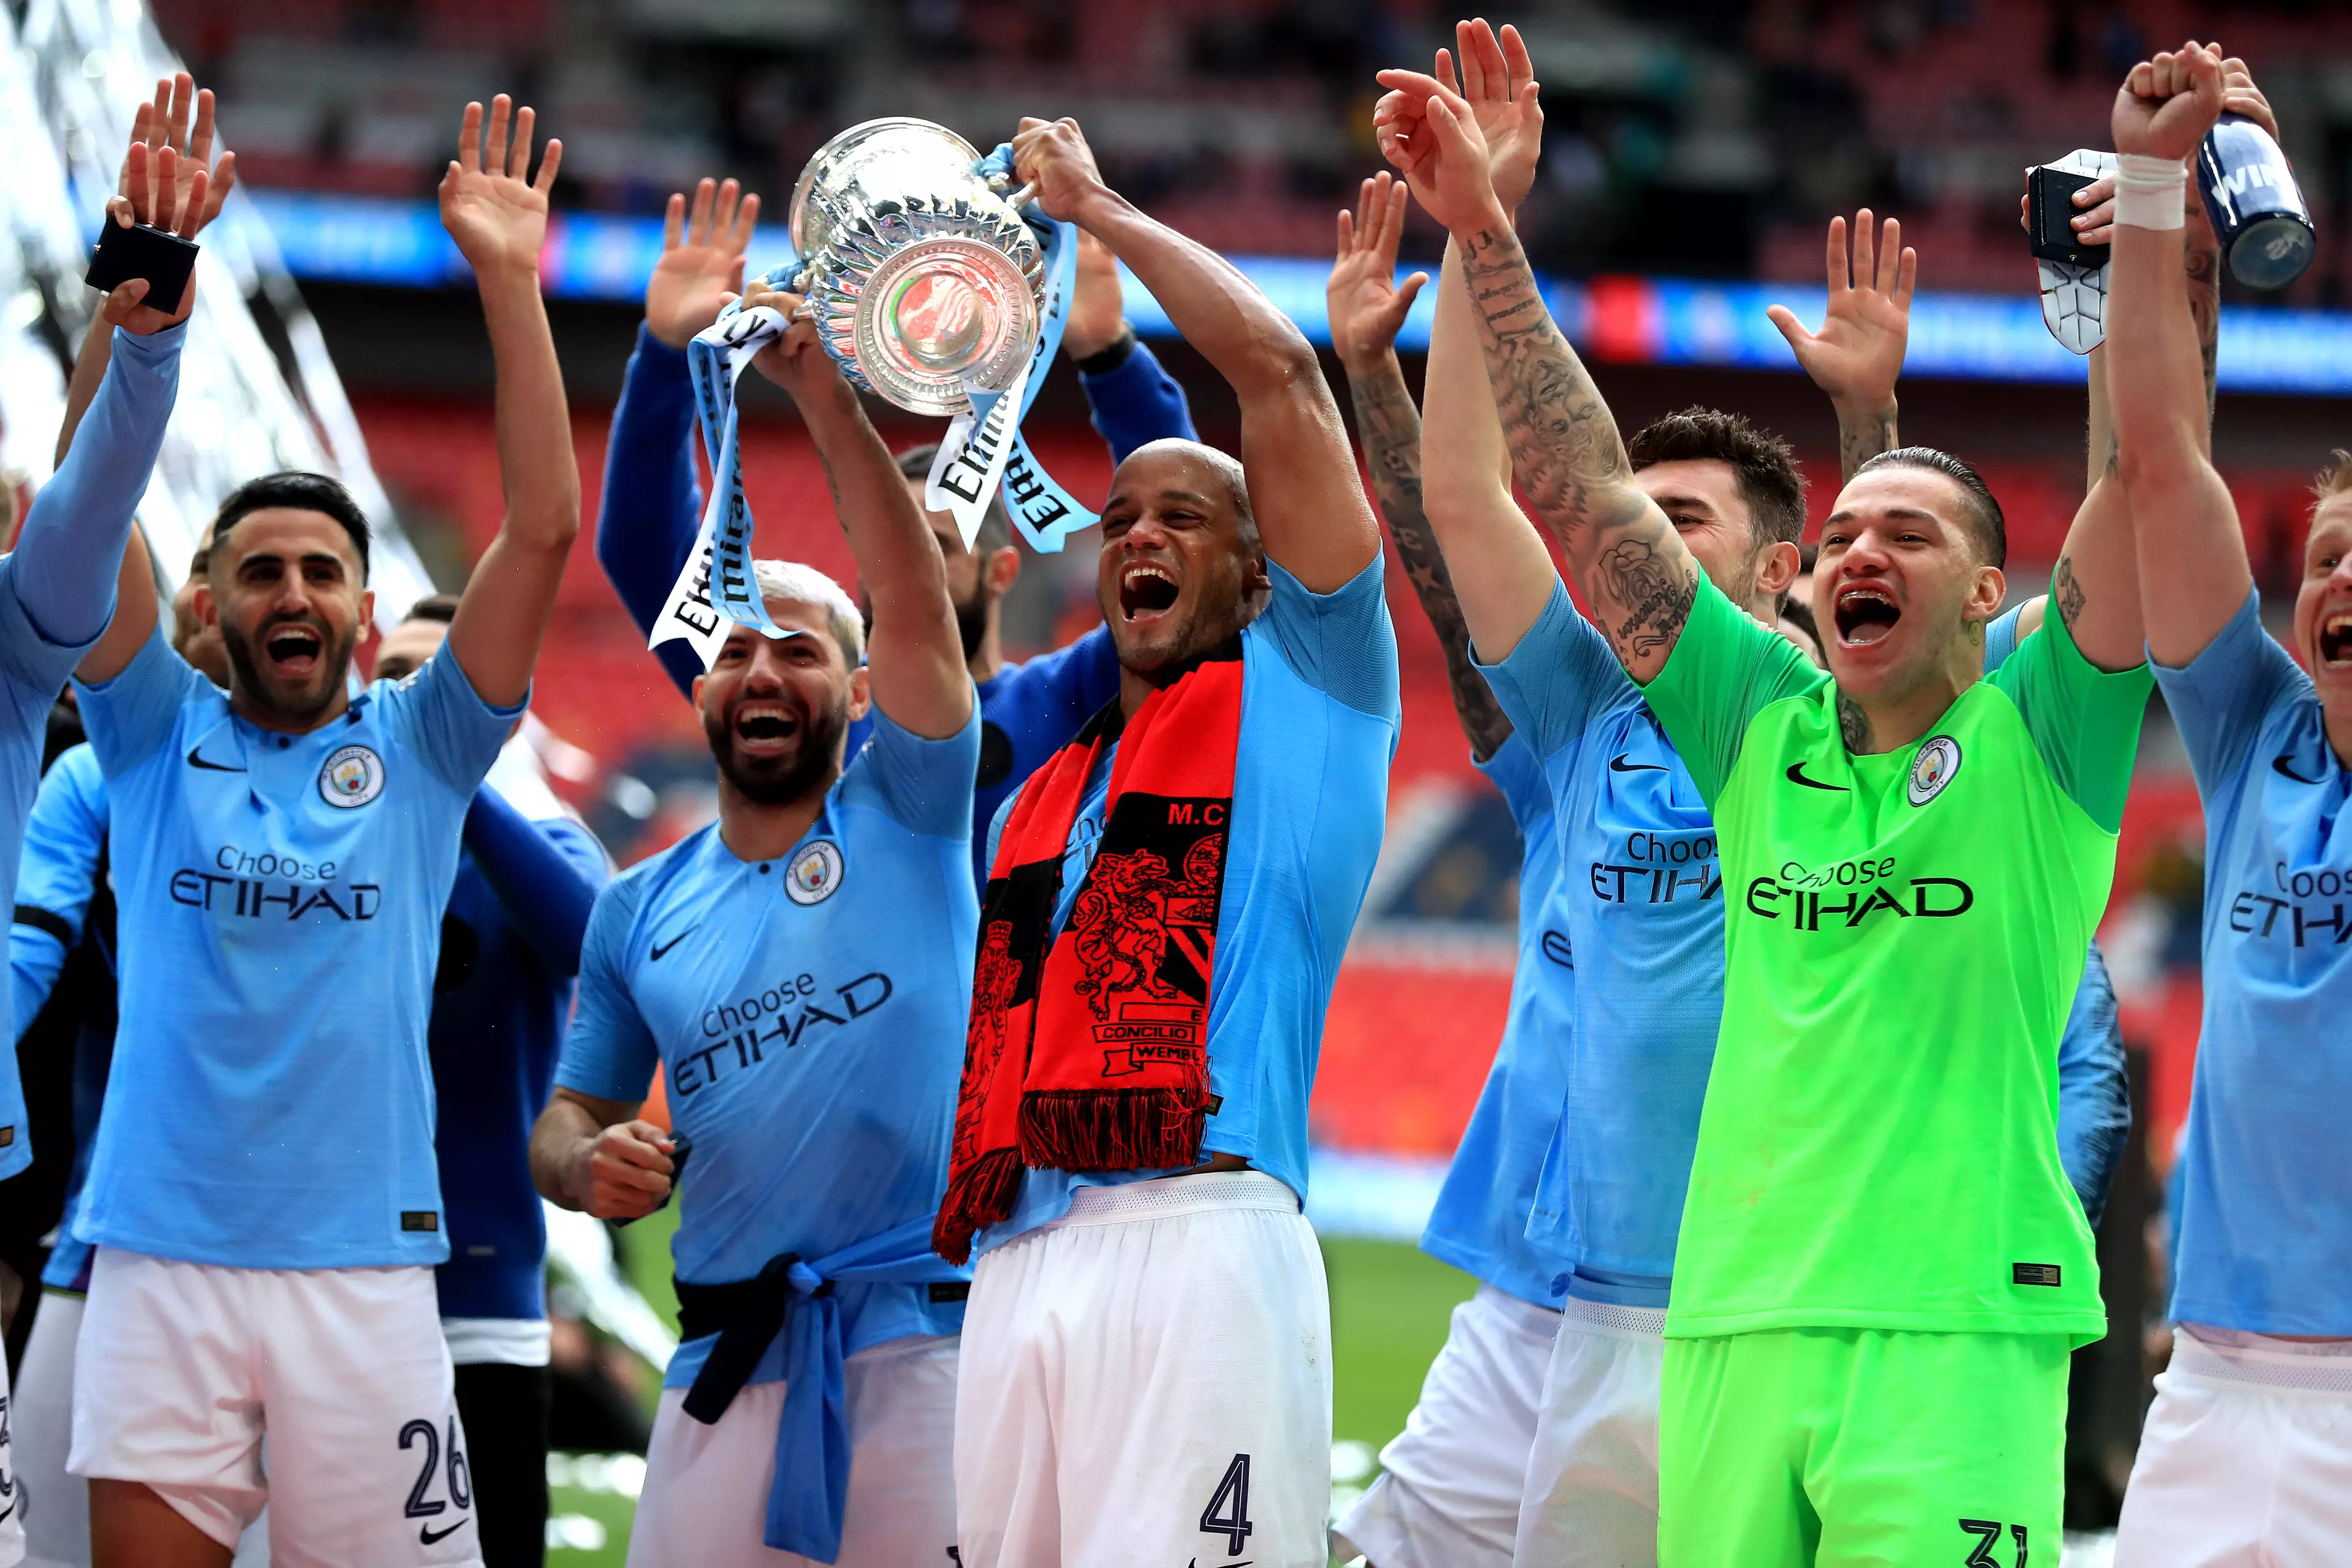 Man City thrashed Watford to win the FA Cup and complete their domestic treble